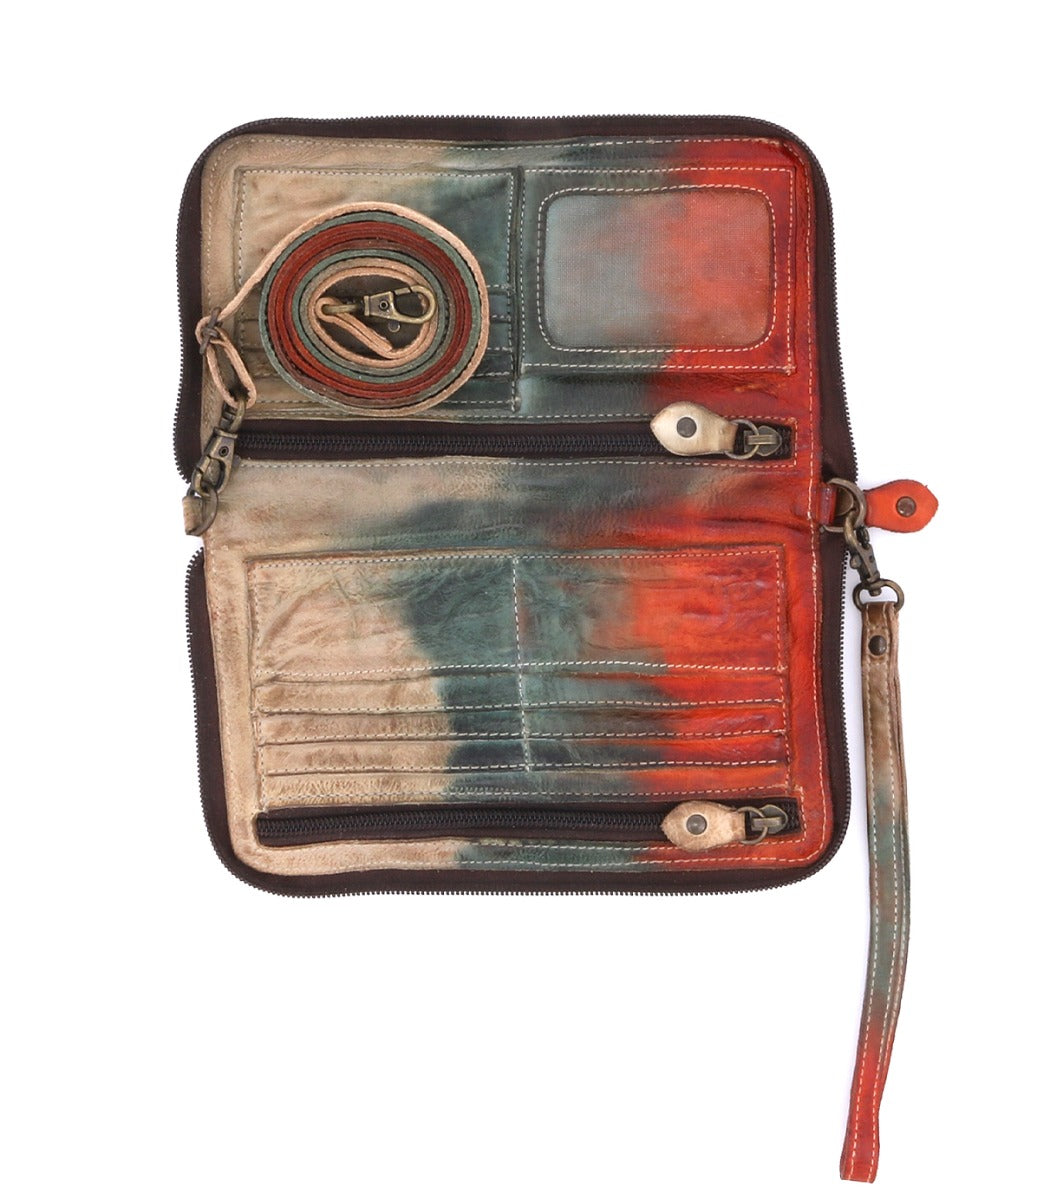 The inside of a Templeton II colorful leather multi-functional clutch from Bed Stu.